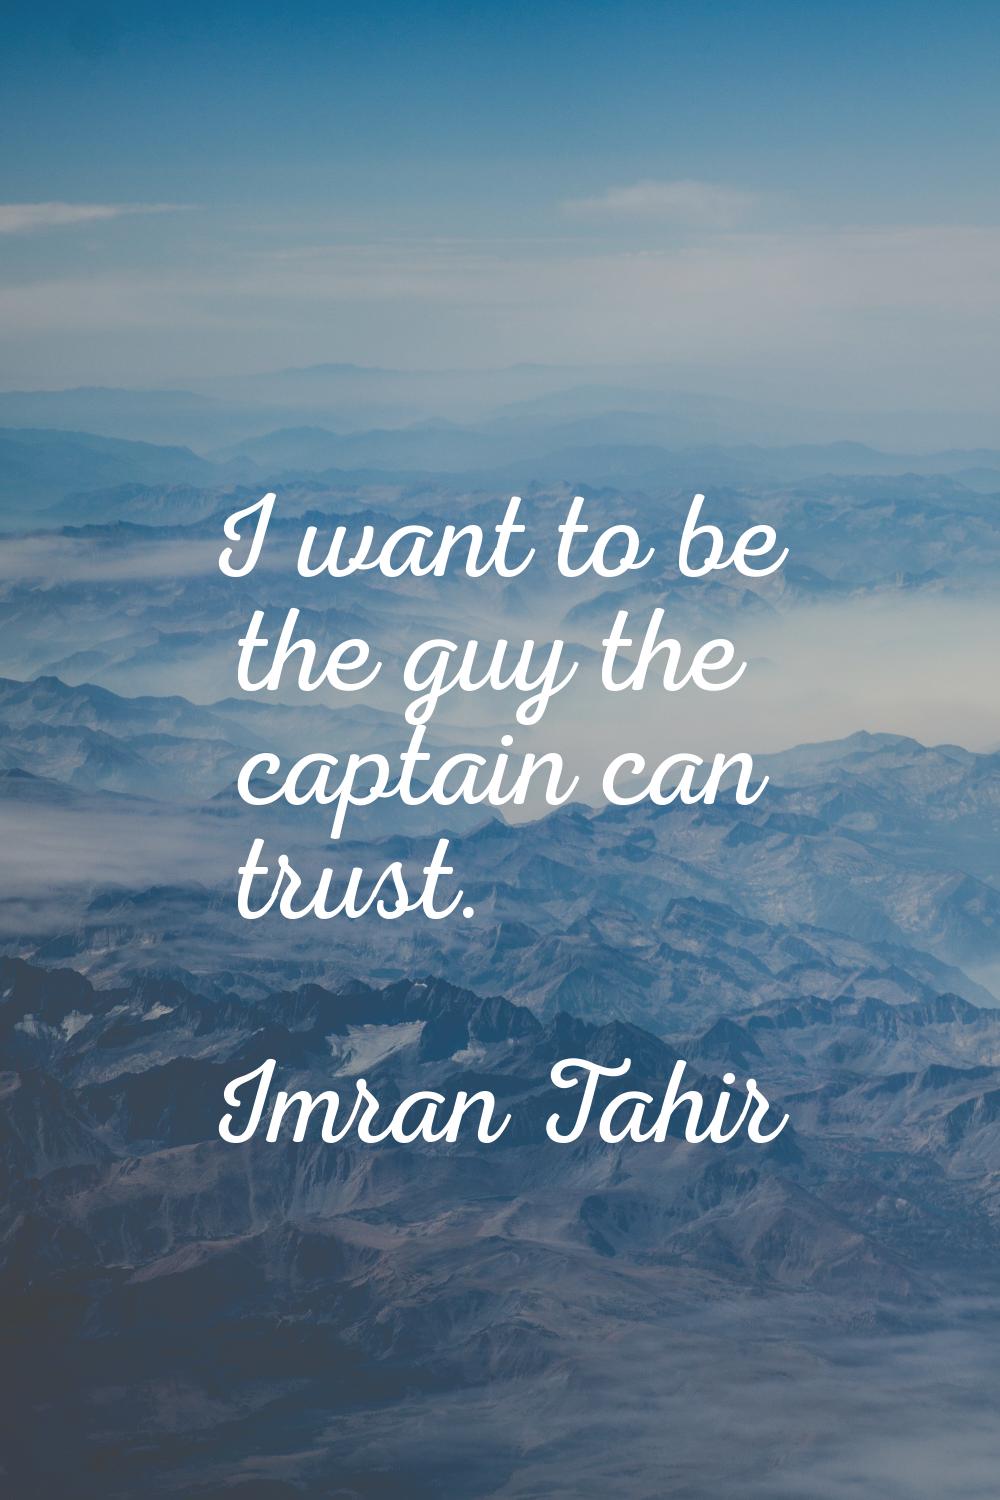 I want to be the guy the captain can trust.